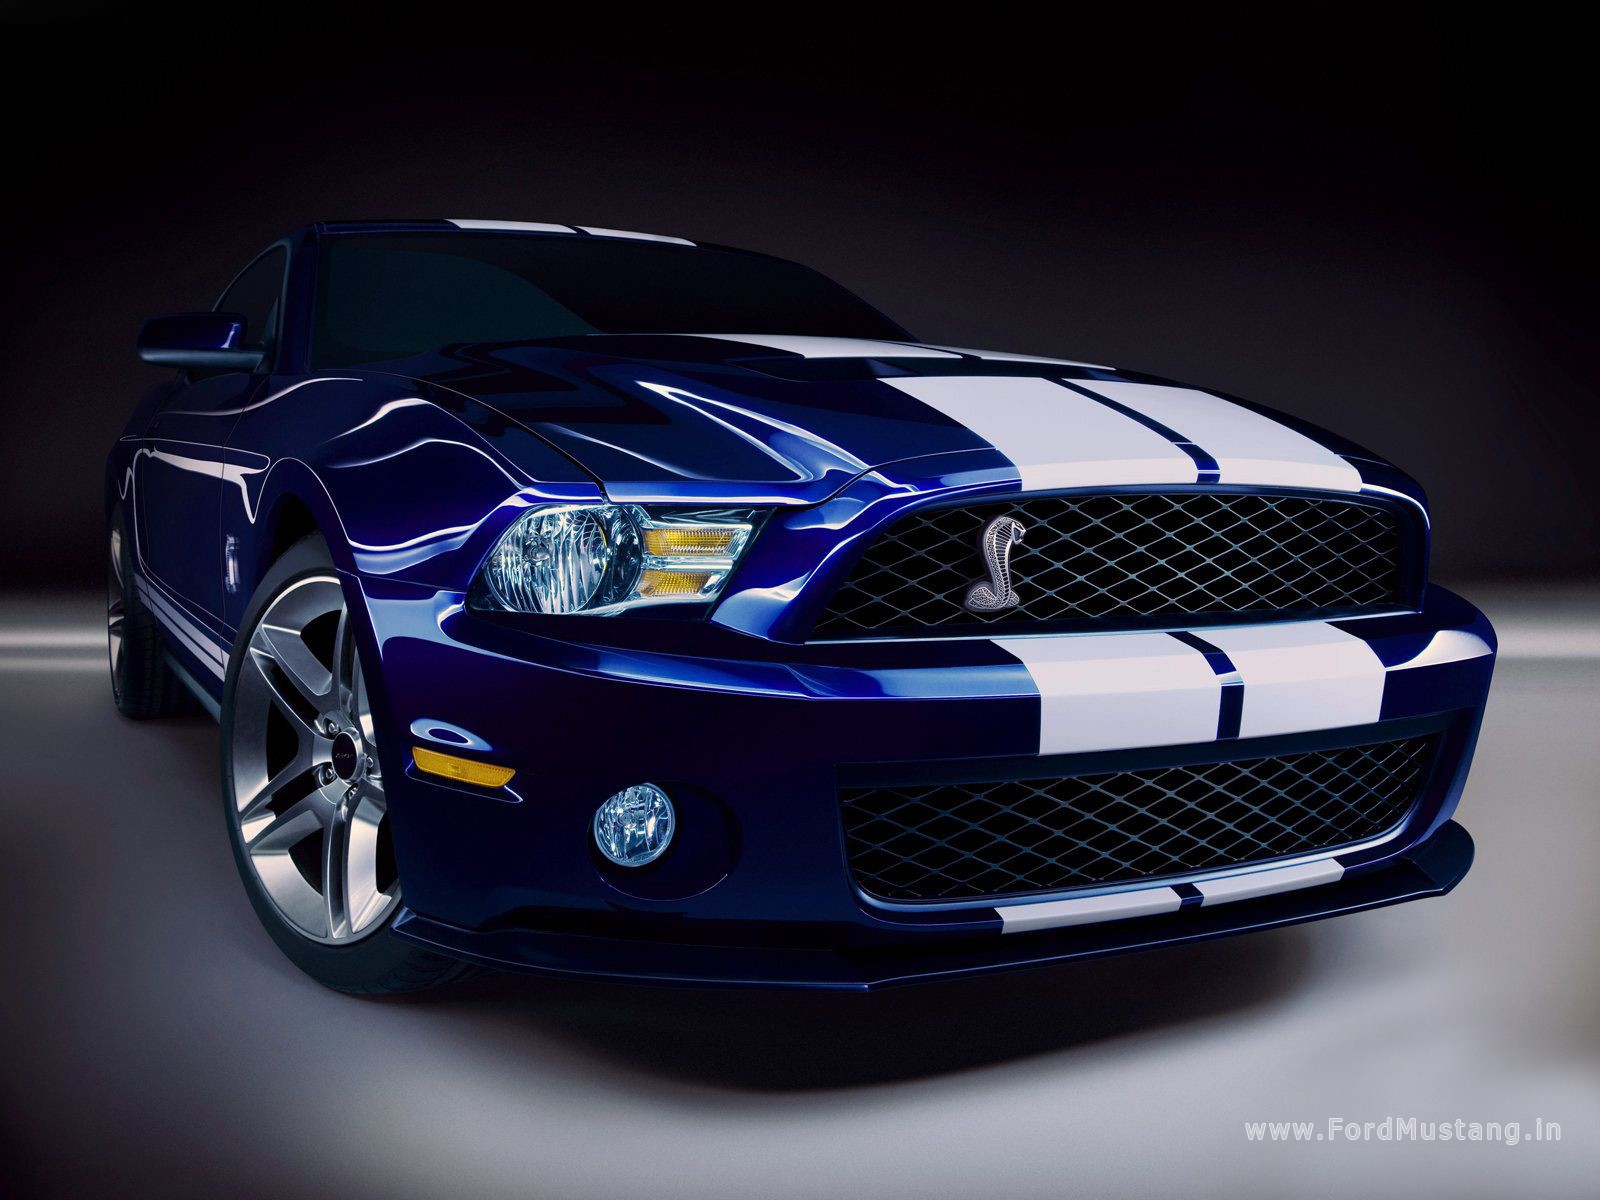 2010 Ford mustang shelby gt500 review #9